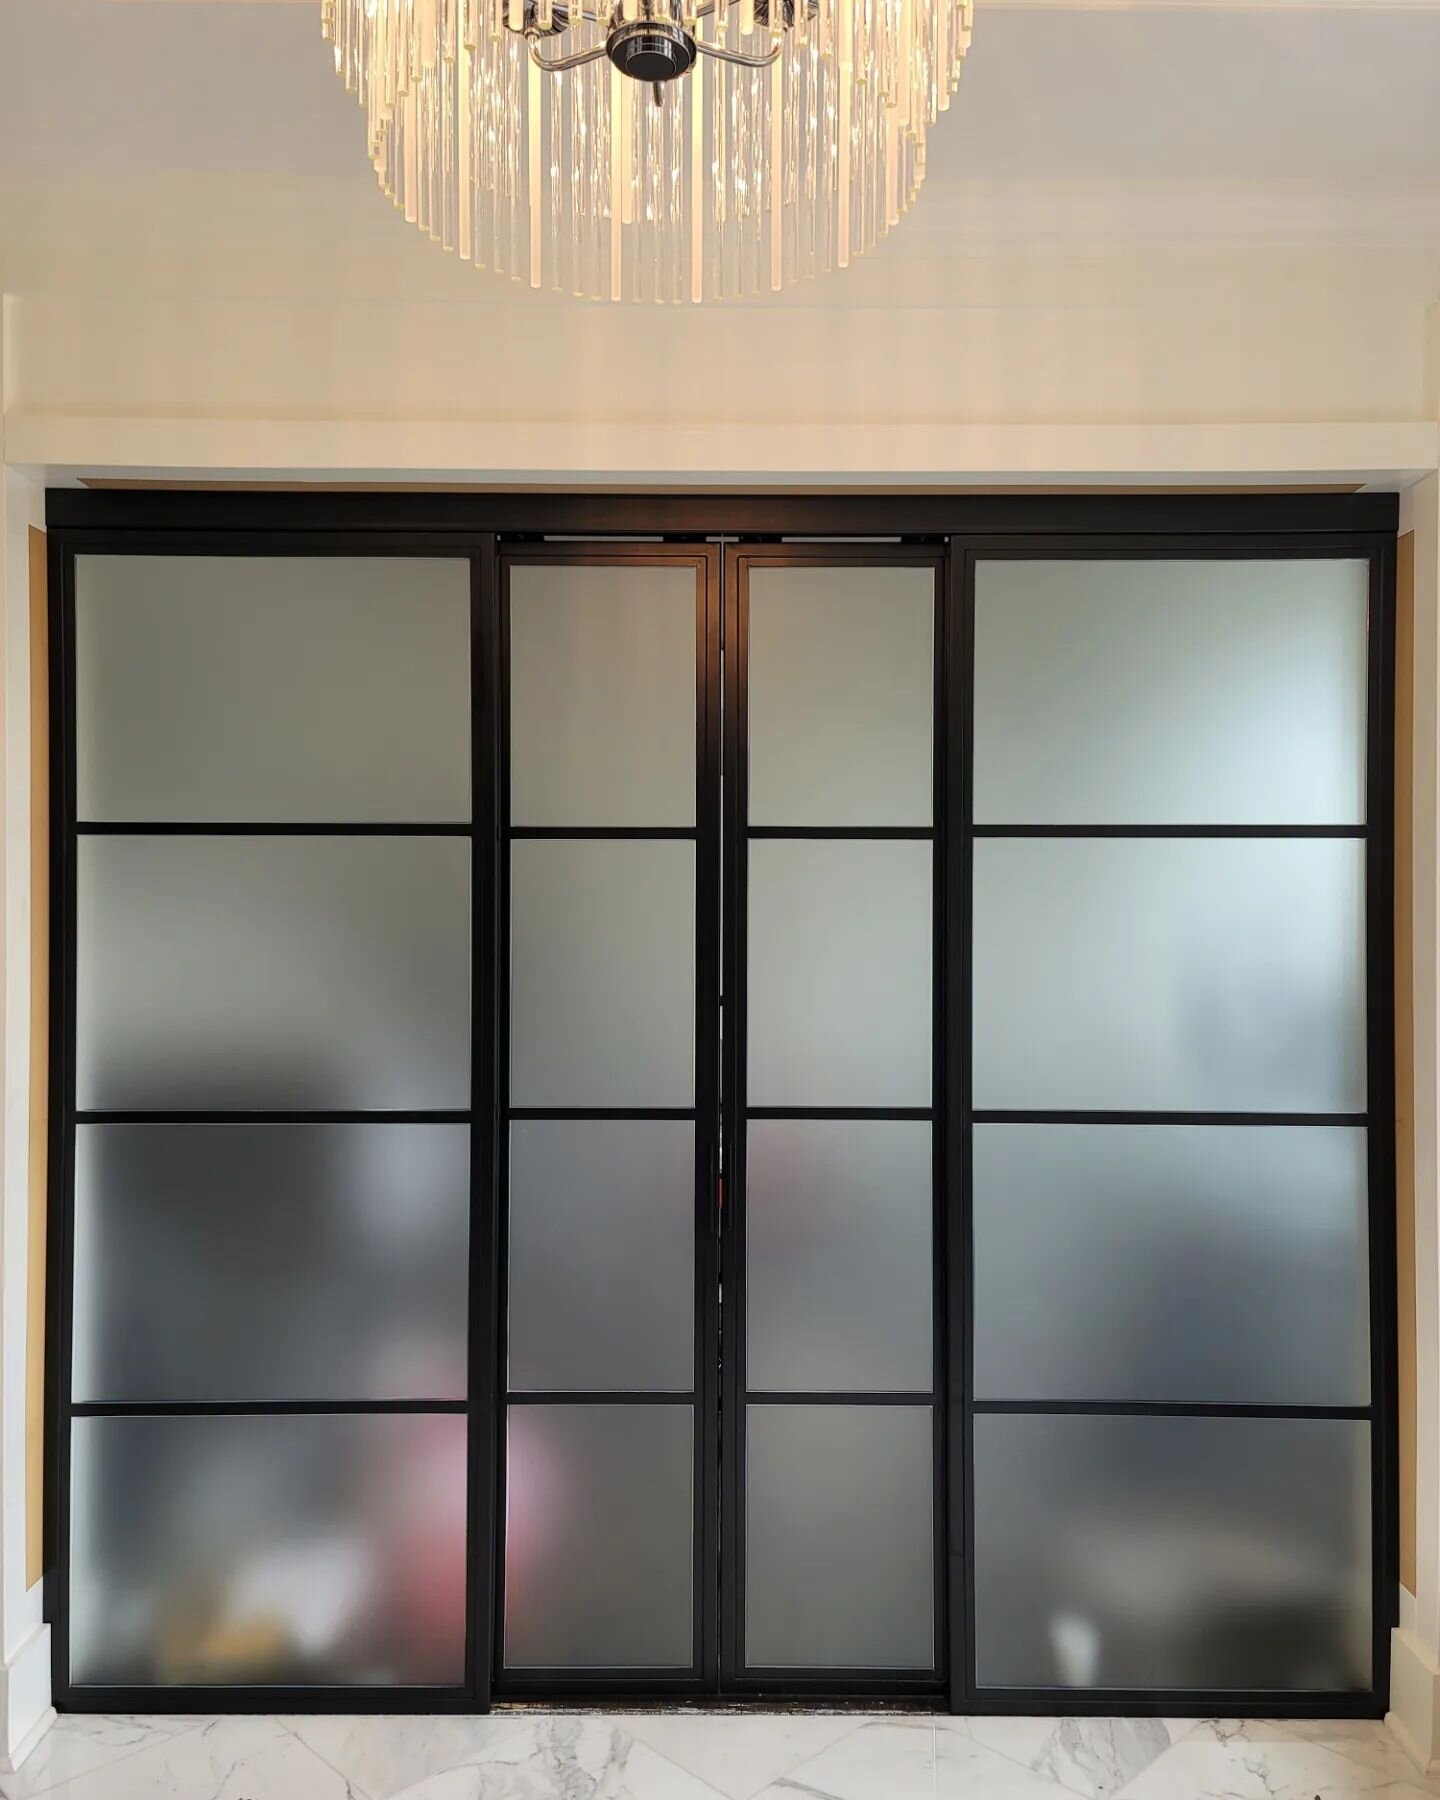 Sliding french doors we fabricated/installed  completed with the privacy by others. #